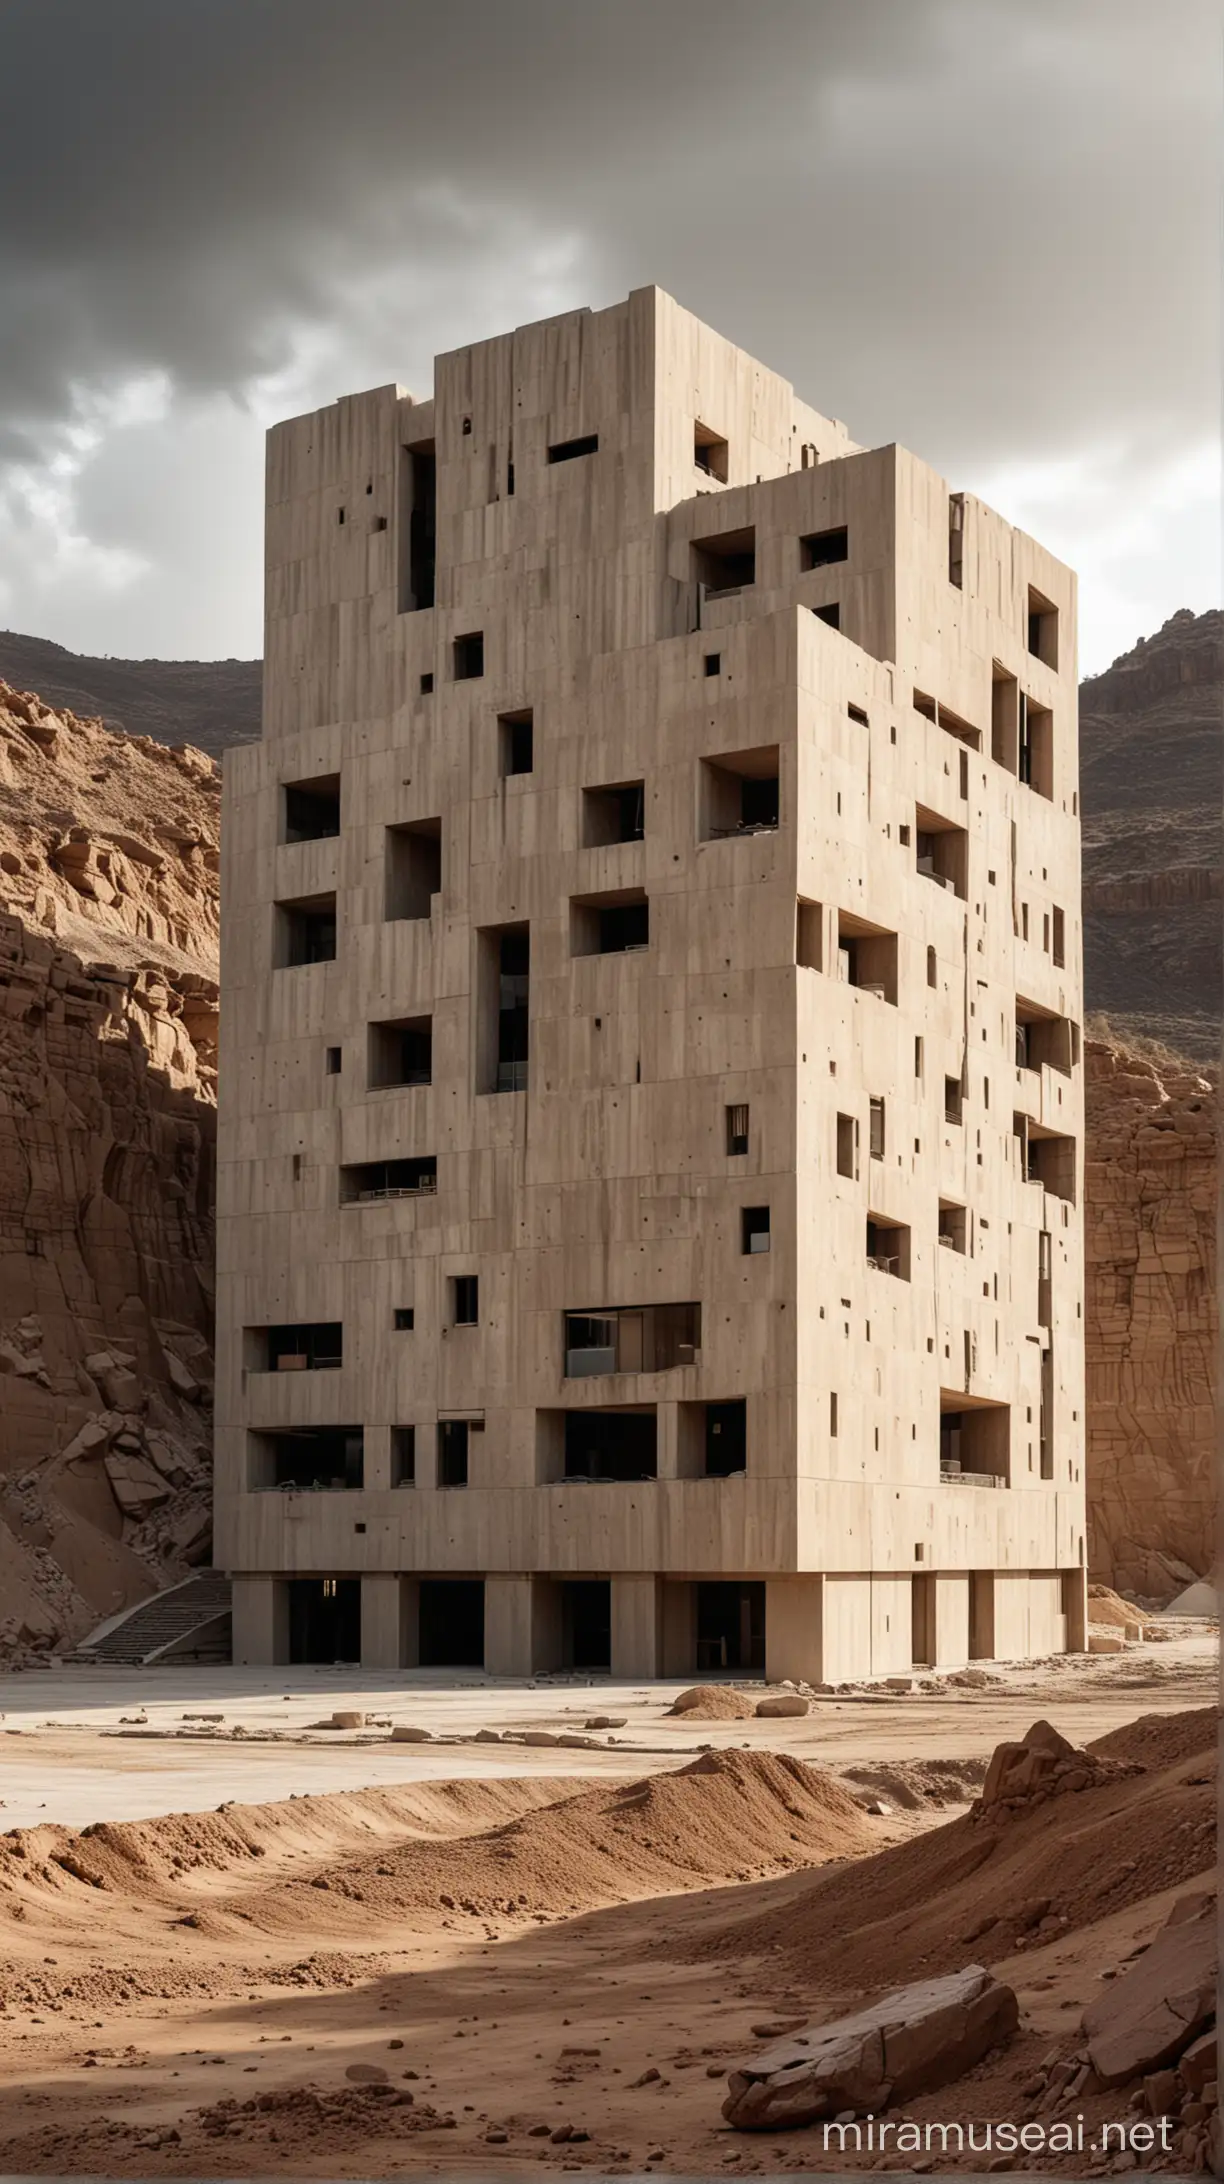 A striking cinematic image of a massive, multi-story building. The structure, constructed from concrete and rammed earth, appears unstructured and unconventional with abstract, unorganized shapes. The building stands in an open-air environment, surrounded by black concrete, with a backdrop of dirt and the raw, textured beauty of white marbre. The lack of people adds to the brooding, hovering atmosphere, making it a captivating, architectural masterpiece., photo, cinematic